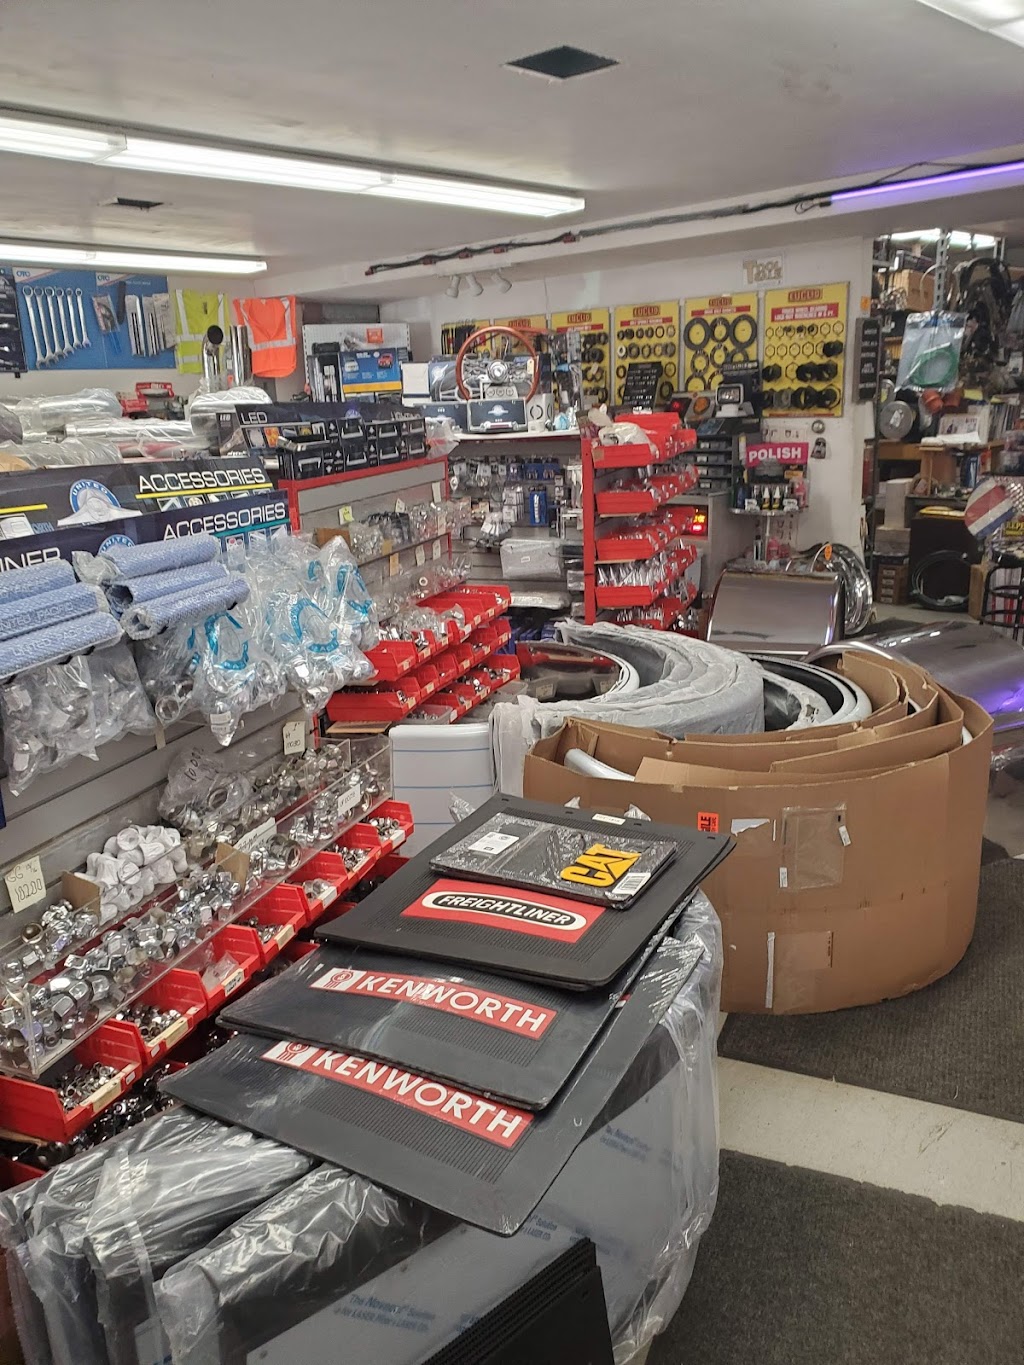 Dutchess County Truck Parts | 3006 US-9, Cold Spring, NY 10516 | Phone: (845) 265-7200